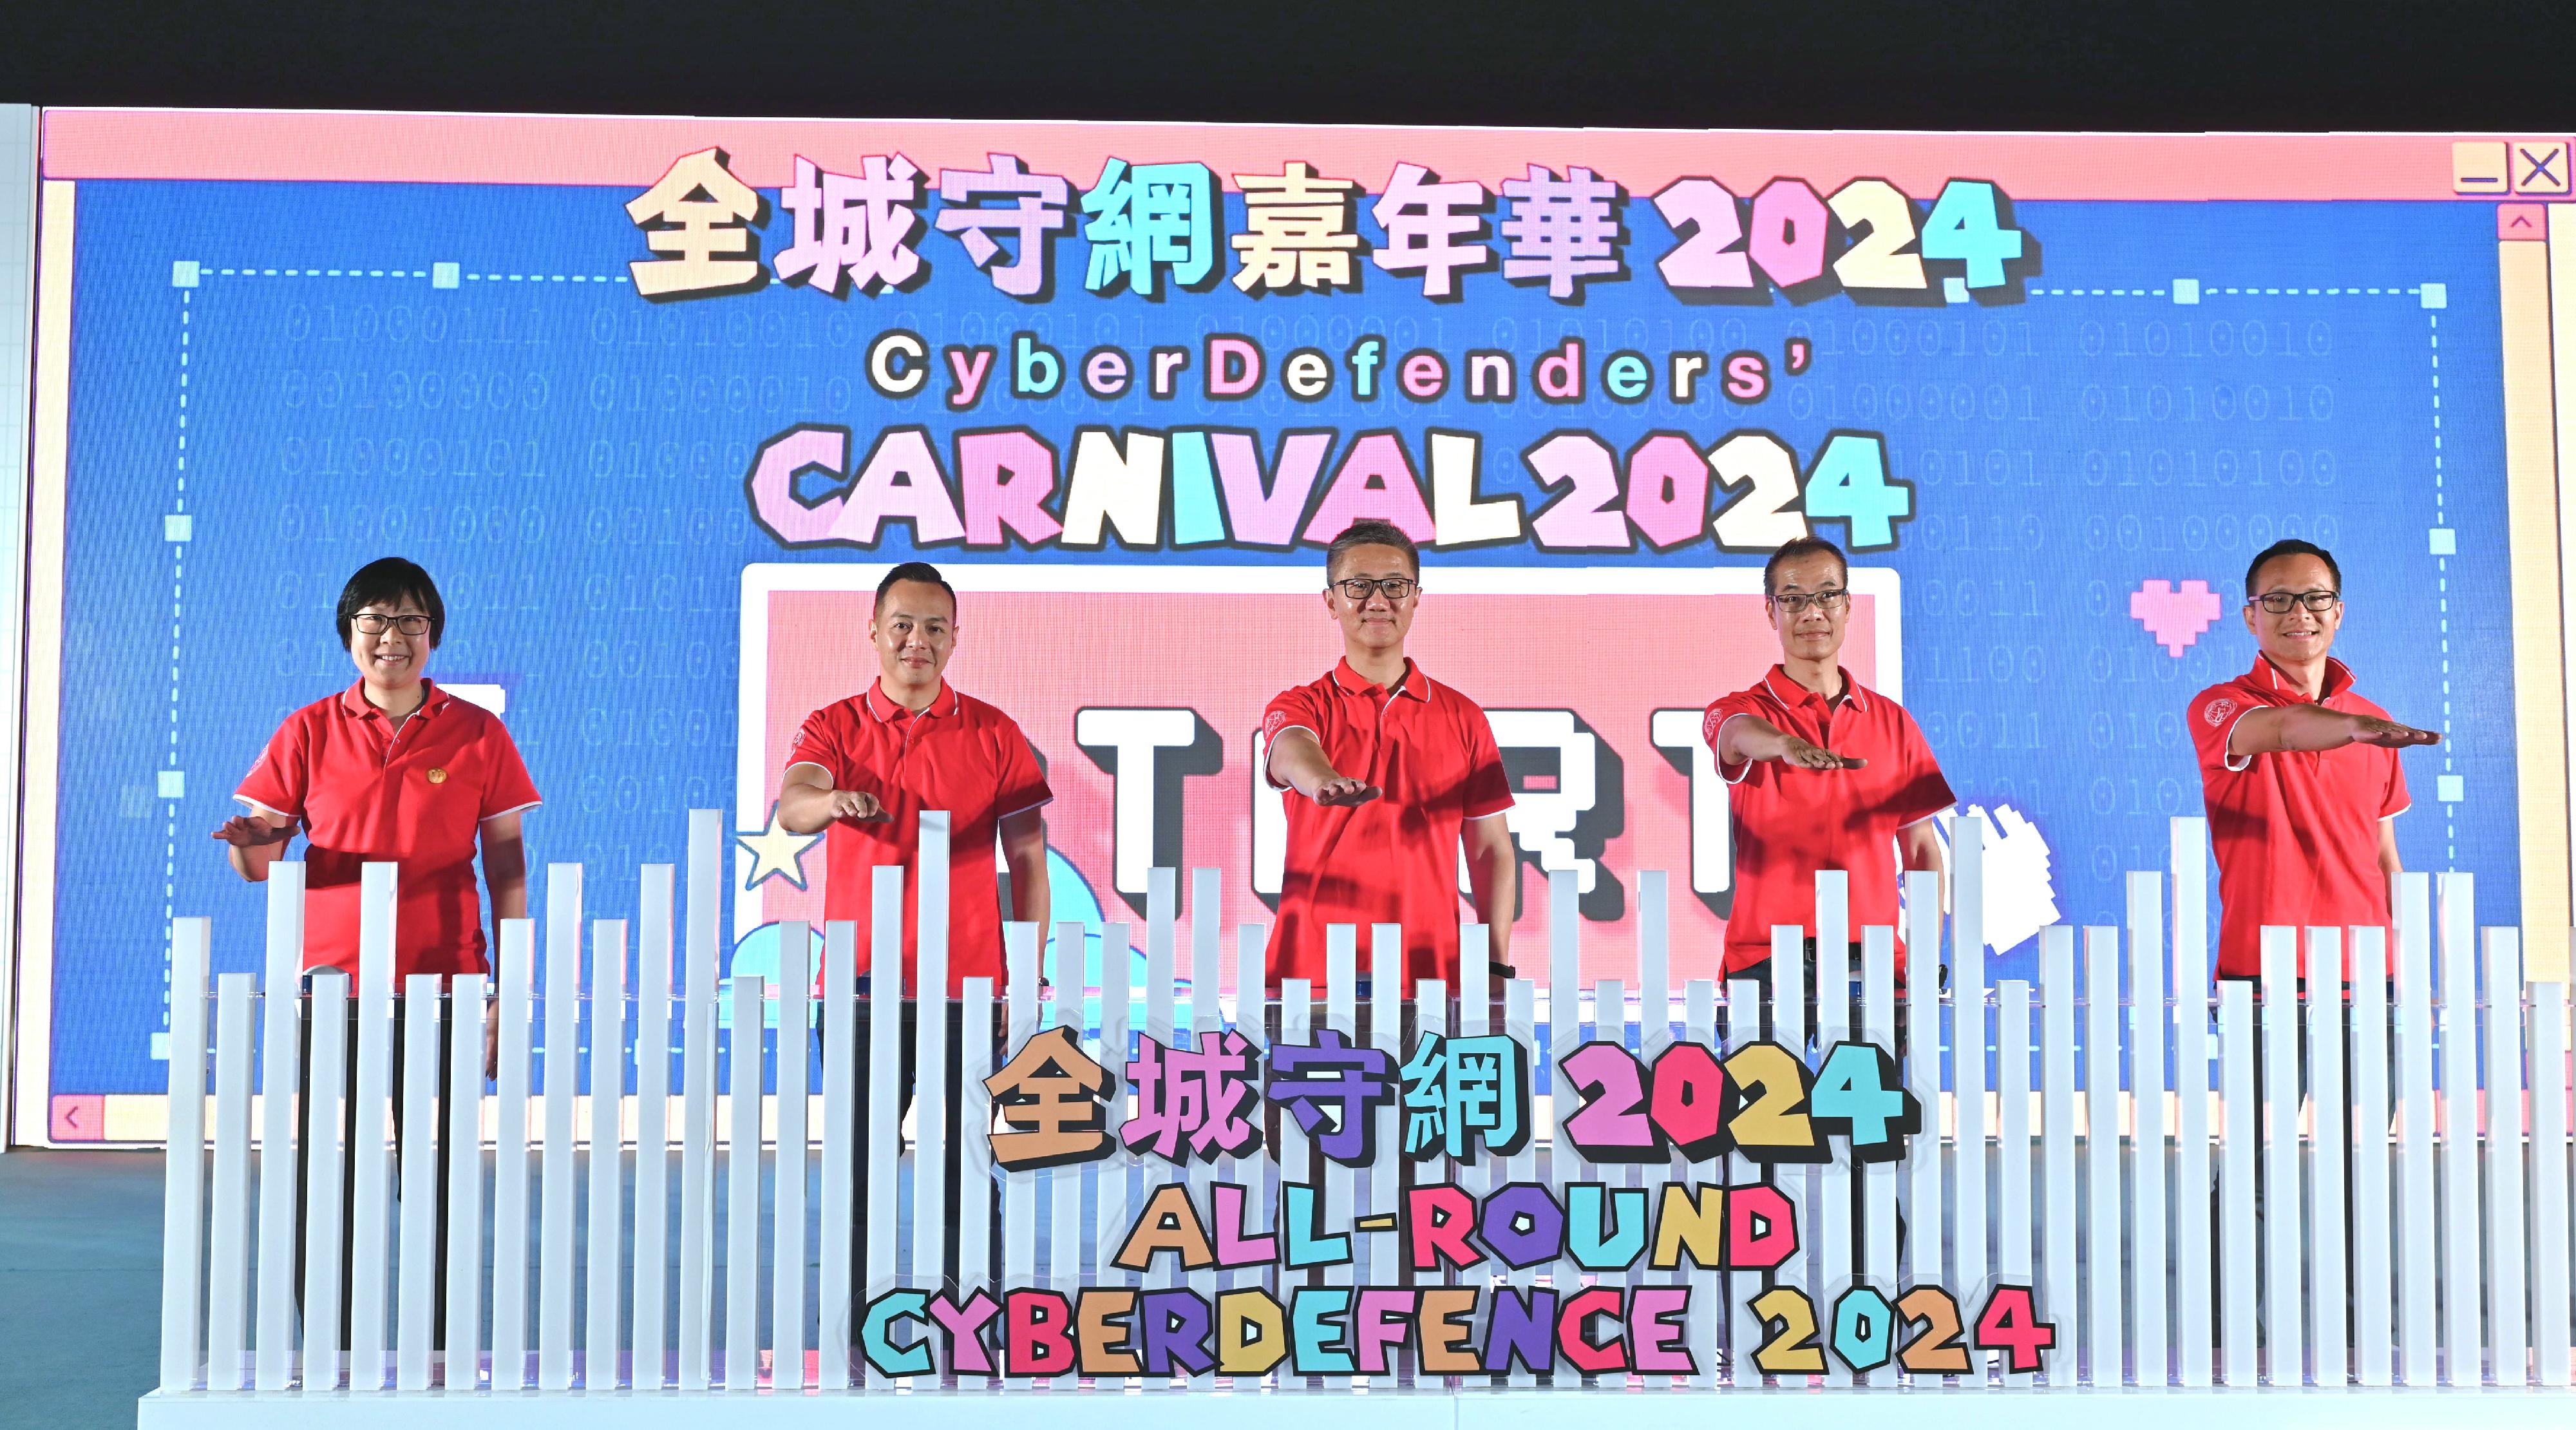 The Cyber Security and Technology Crime Bureau of the Hong Kong Police Force held the “CyberDefenders’ Carnival 2024” at HarbourChill, Wan Chai today (January 20). Photo shows the Commissioner of Police, Mr Siu Chak-yee (centre); the Deputy Commissioner of Police (Operations) , Mr Chow Yat-ming (second left); the Director of Crime and Security, Mr Yip Wan-lung (second right); the Assistant Commissioner (Crime), Ms Chung Wing-man (first left); and the Chief Superintendent of Police Cyber Security and Technology Crime Bureau, Mr Lam Cheuk-ho (first right), officiating at the kick-off ceremony.